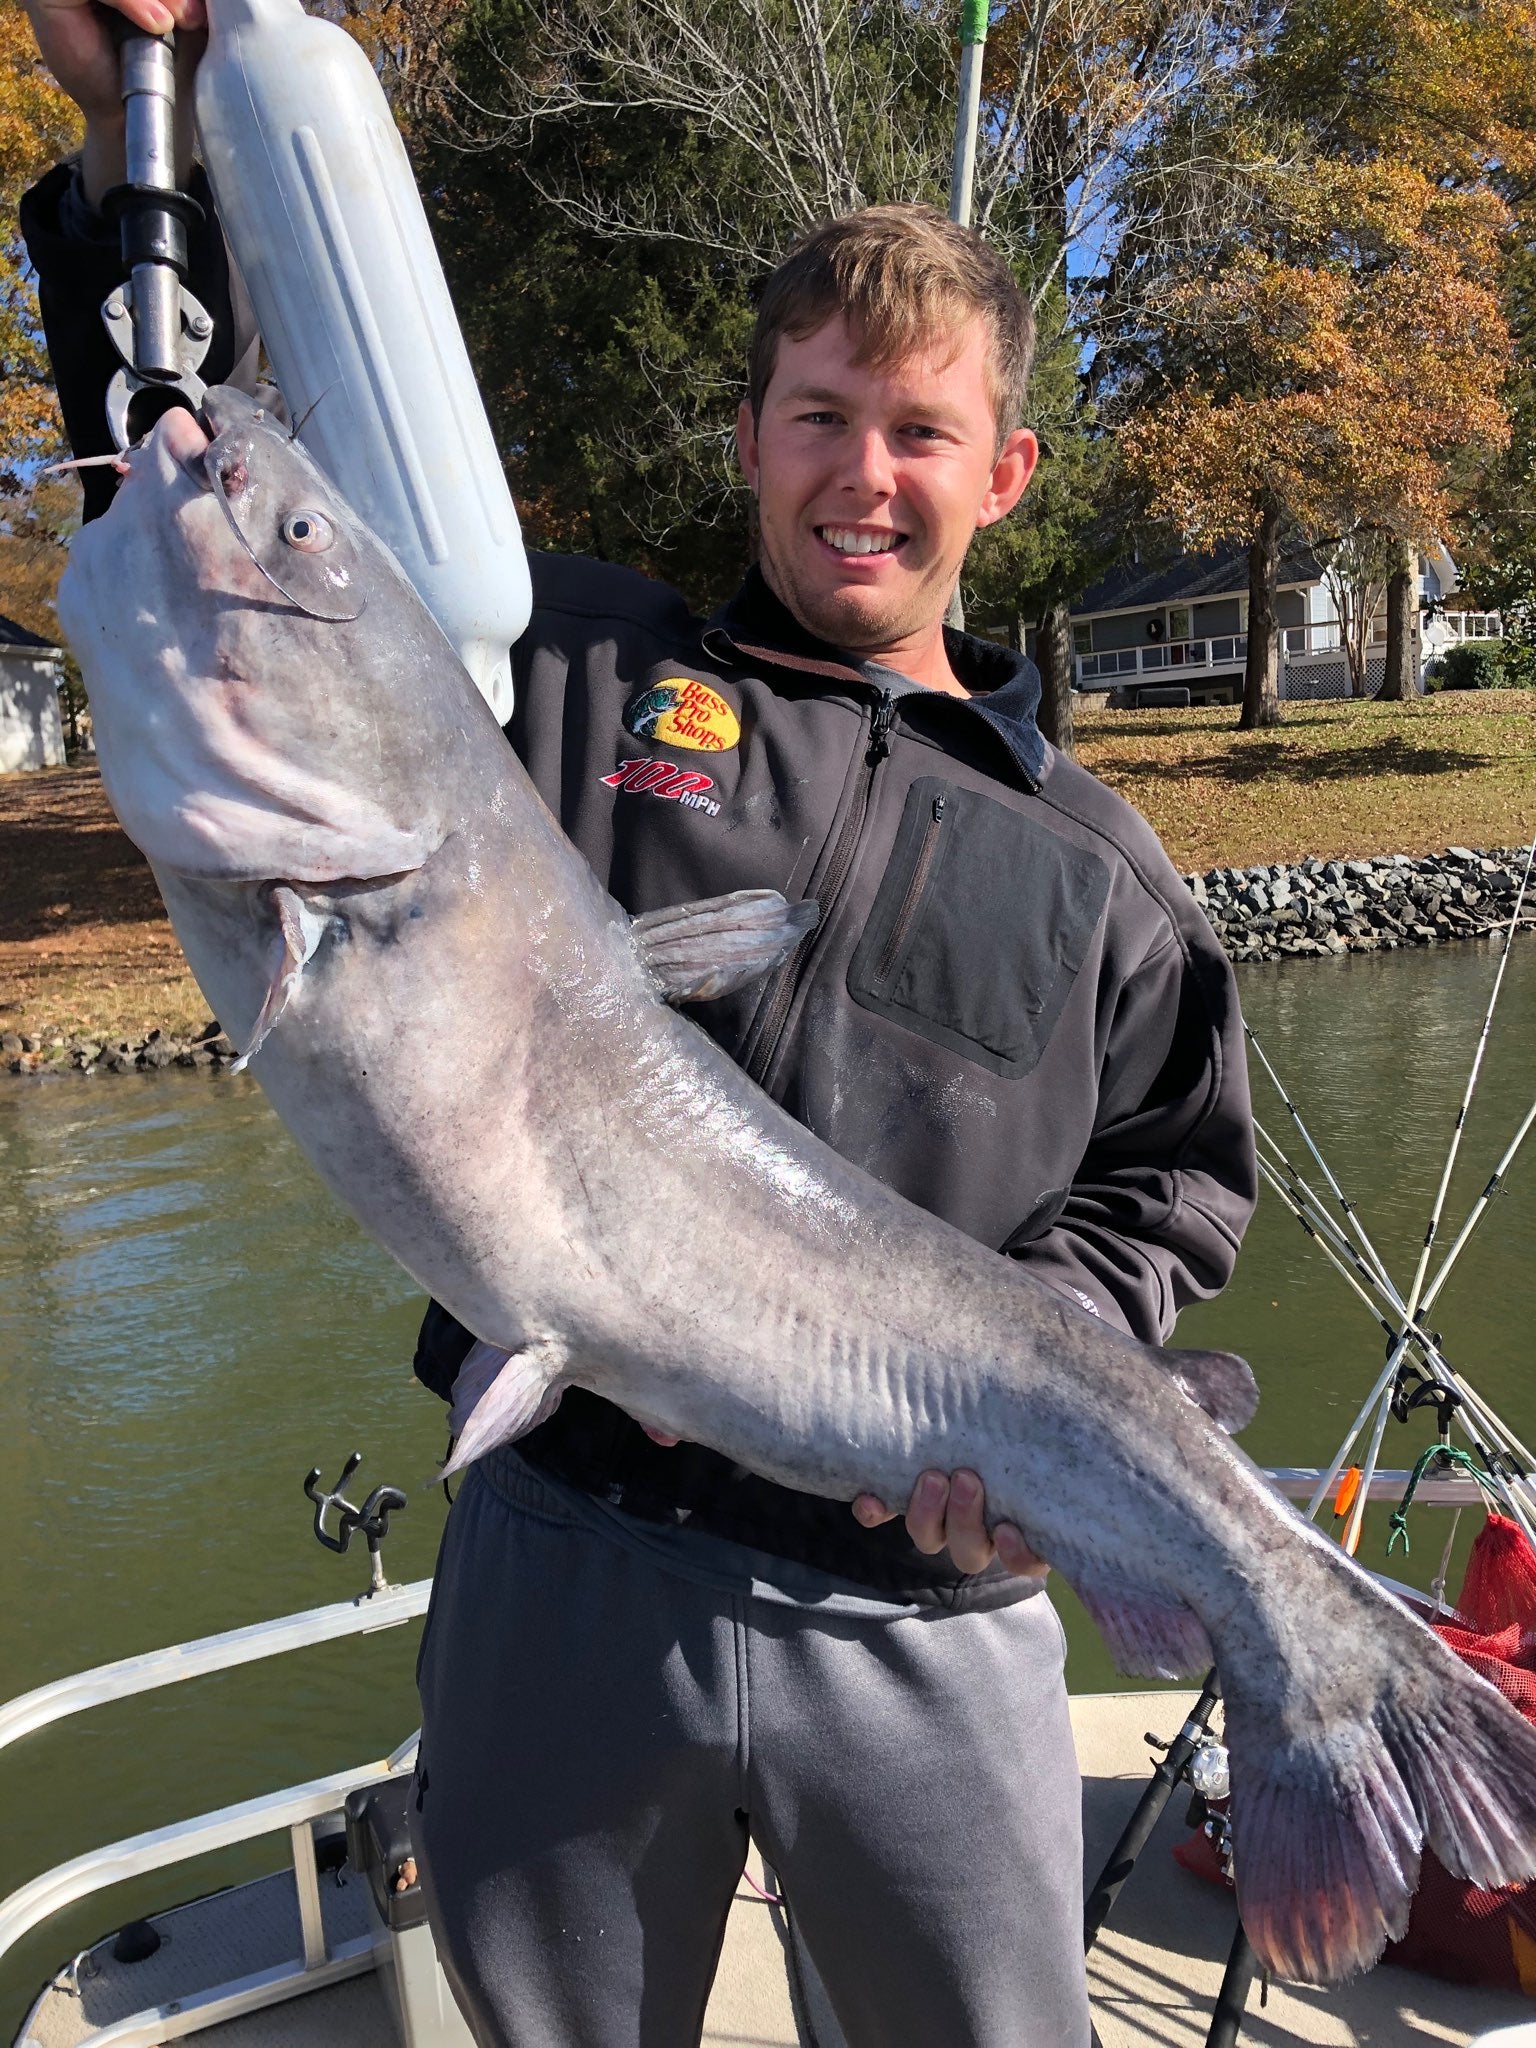 AHQ INSIDER Lake Wylie (NC/SC) Fall 2019 Fishing Report – Updated December 9